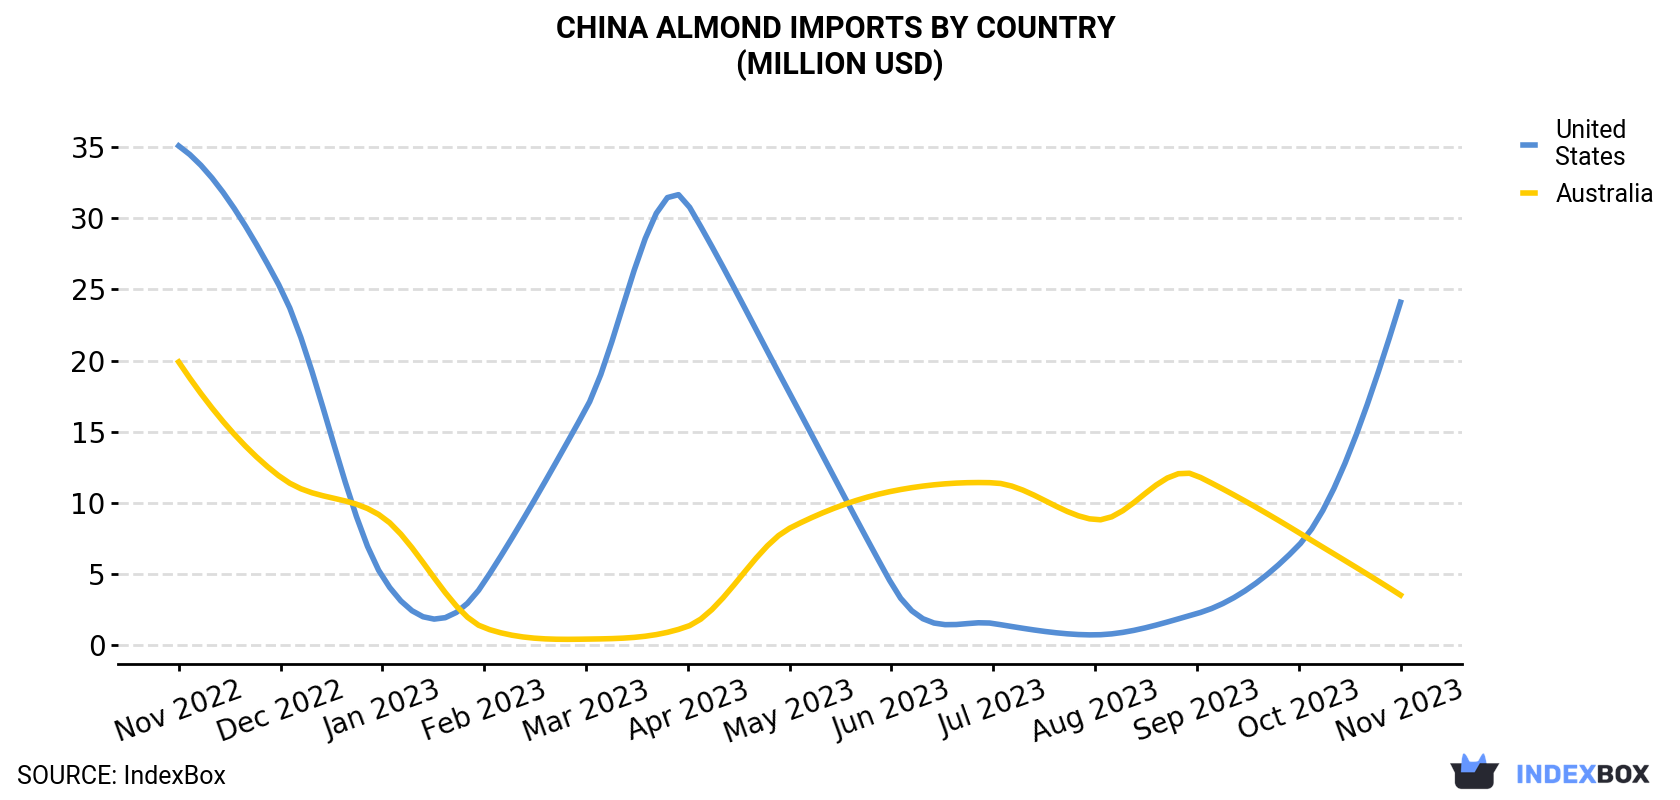 China Almond Imports By Country (Million USD)